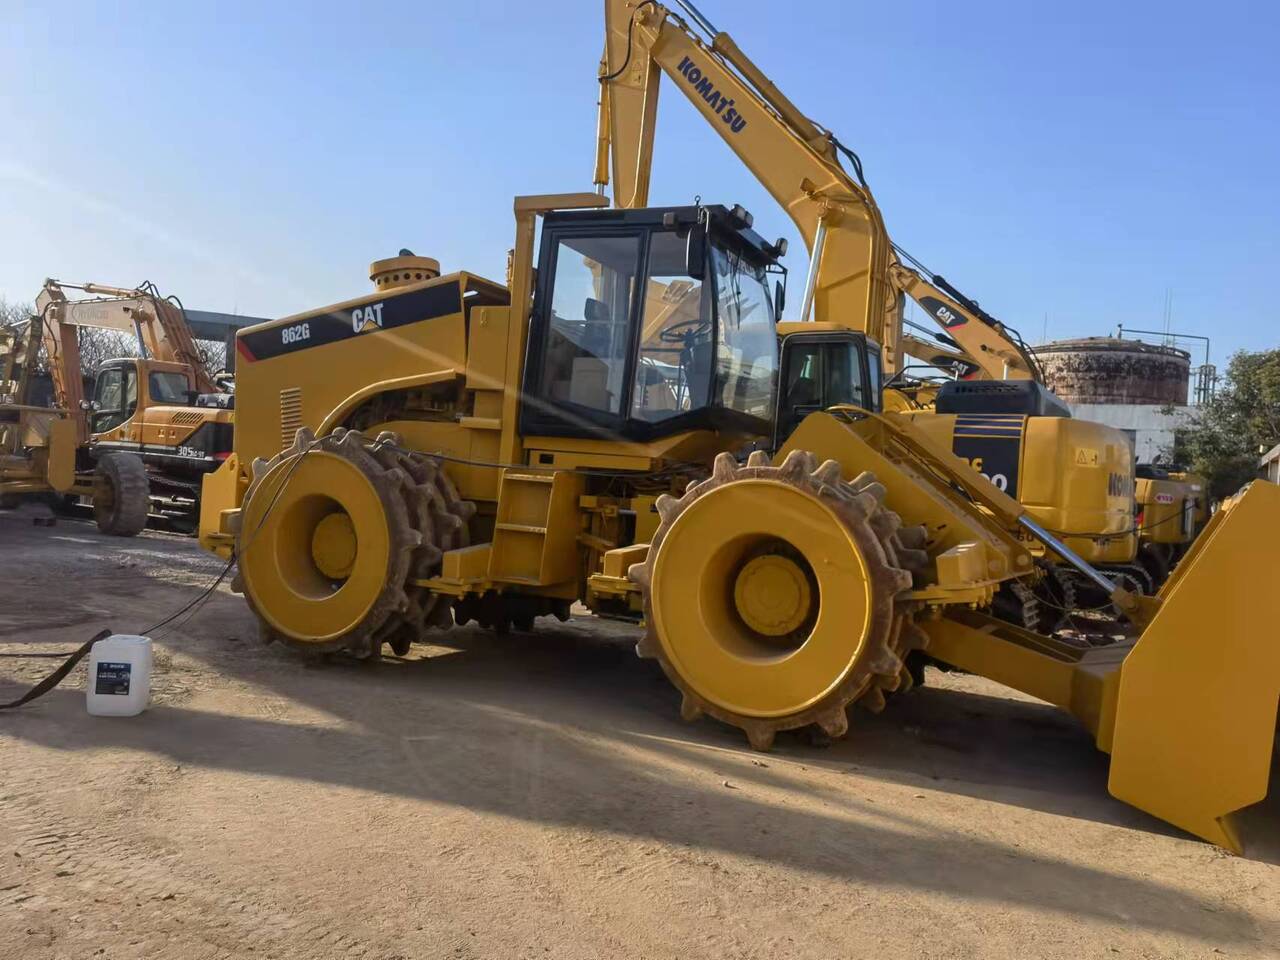 Compact track loader CATERPILLAR 862G: picture 2